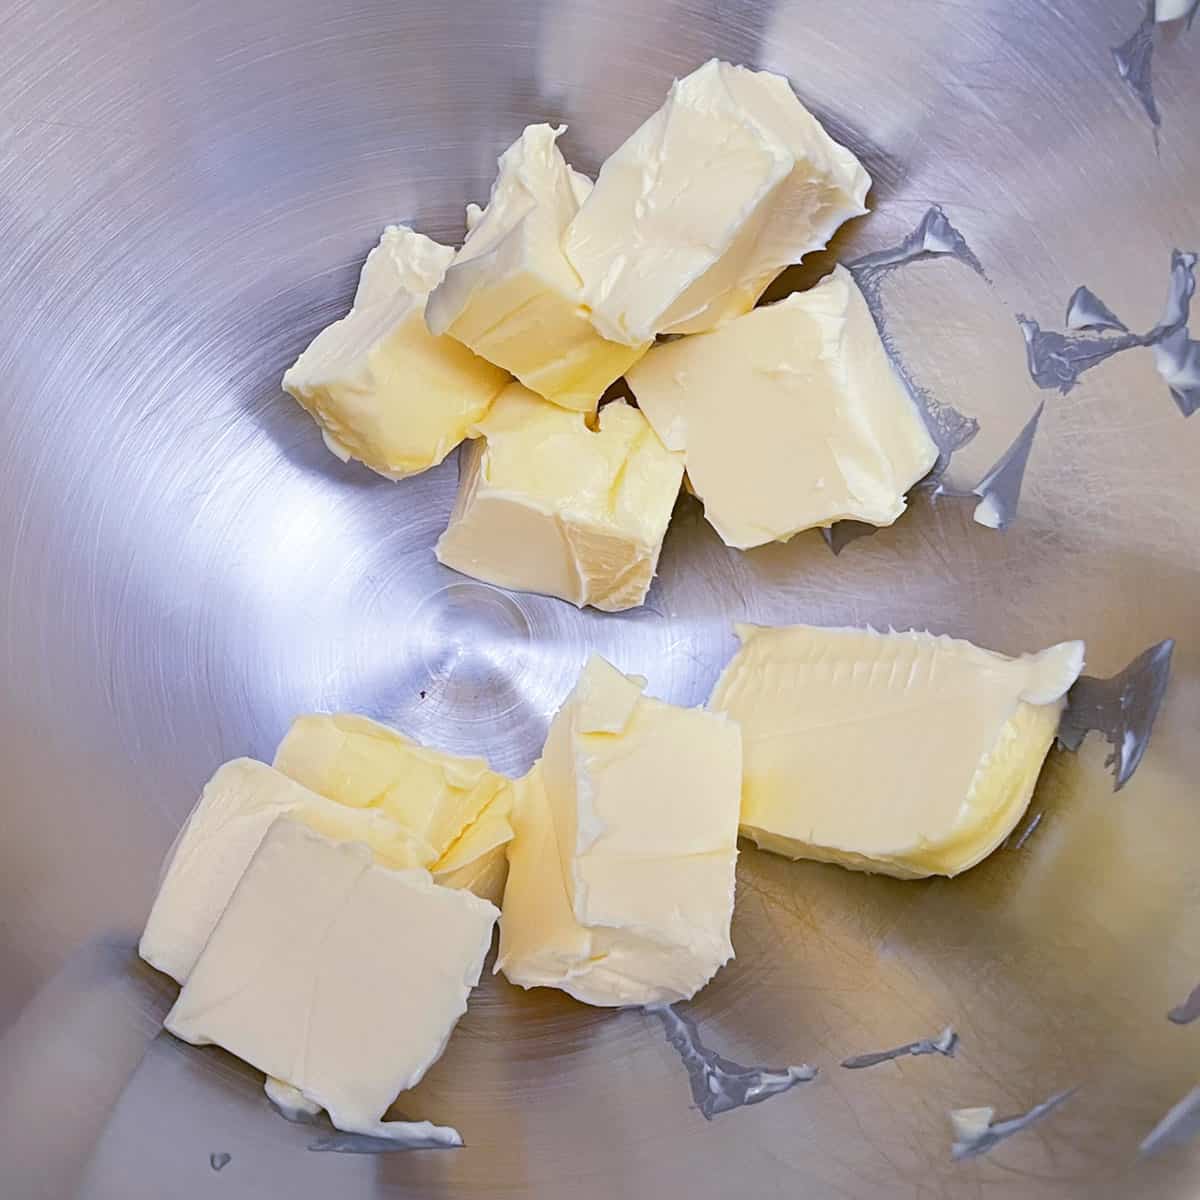 Butter cubed and added to mixer bowl.